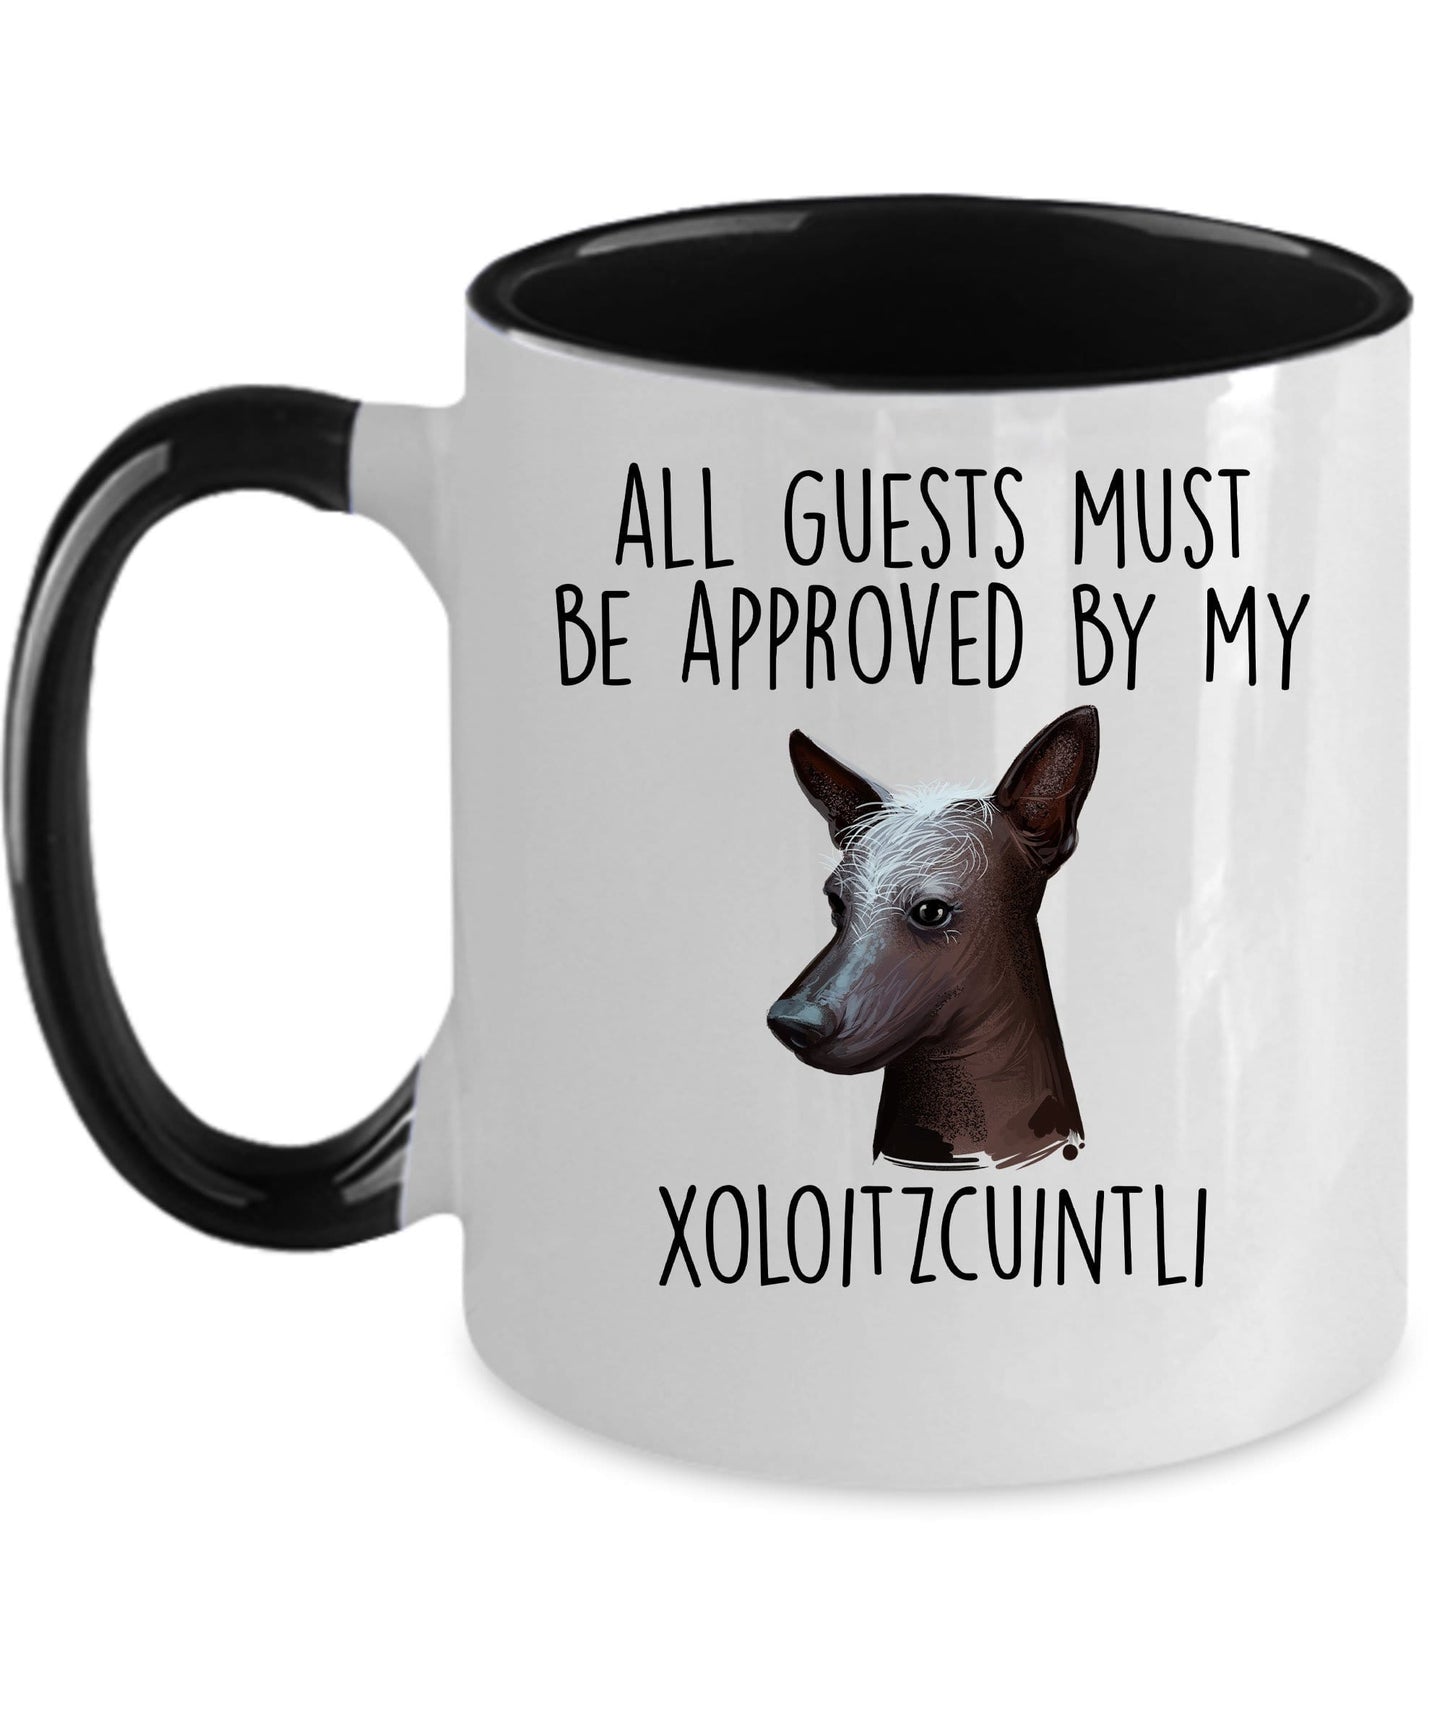 Xoloitzcuintli - Mexican Hairless Dog funny coffee Mug - All Guests must be approved